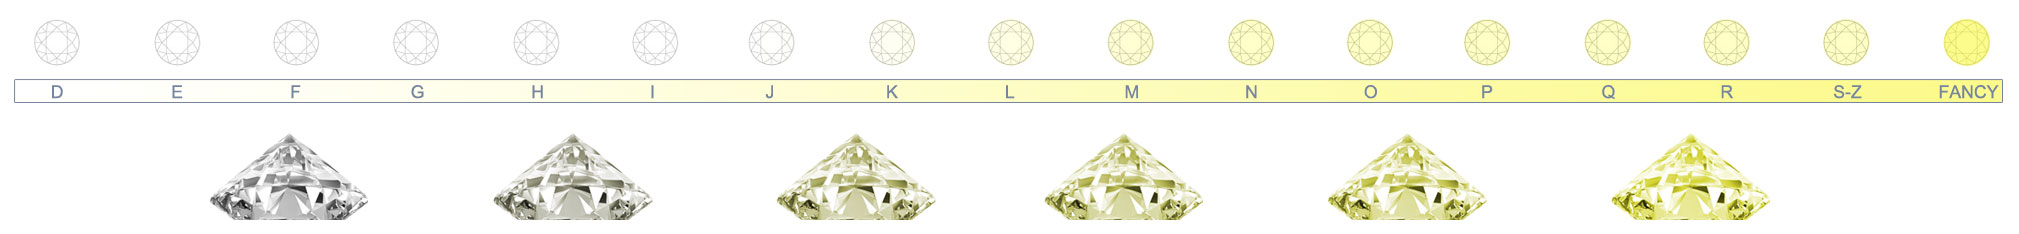 Detail of Diamond Color Grades. The data contains seven color grades from light to colorless: D, E, F, G, H, I, J. From the Gemological Institute of America Inc. (2018a). Diamond Quality Factors. https://www.gia.edu/diamond-quality-factor